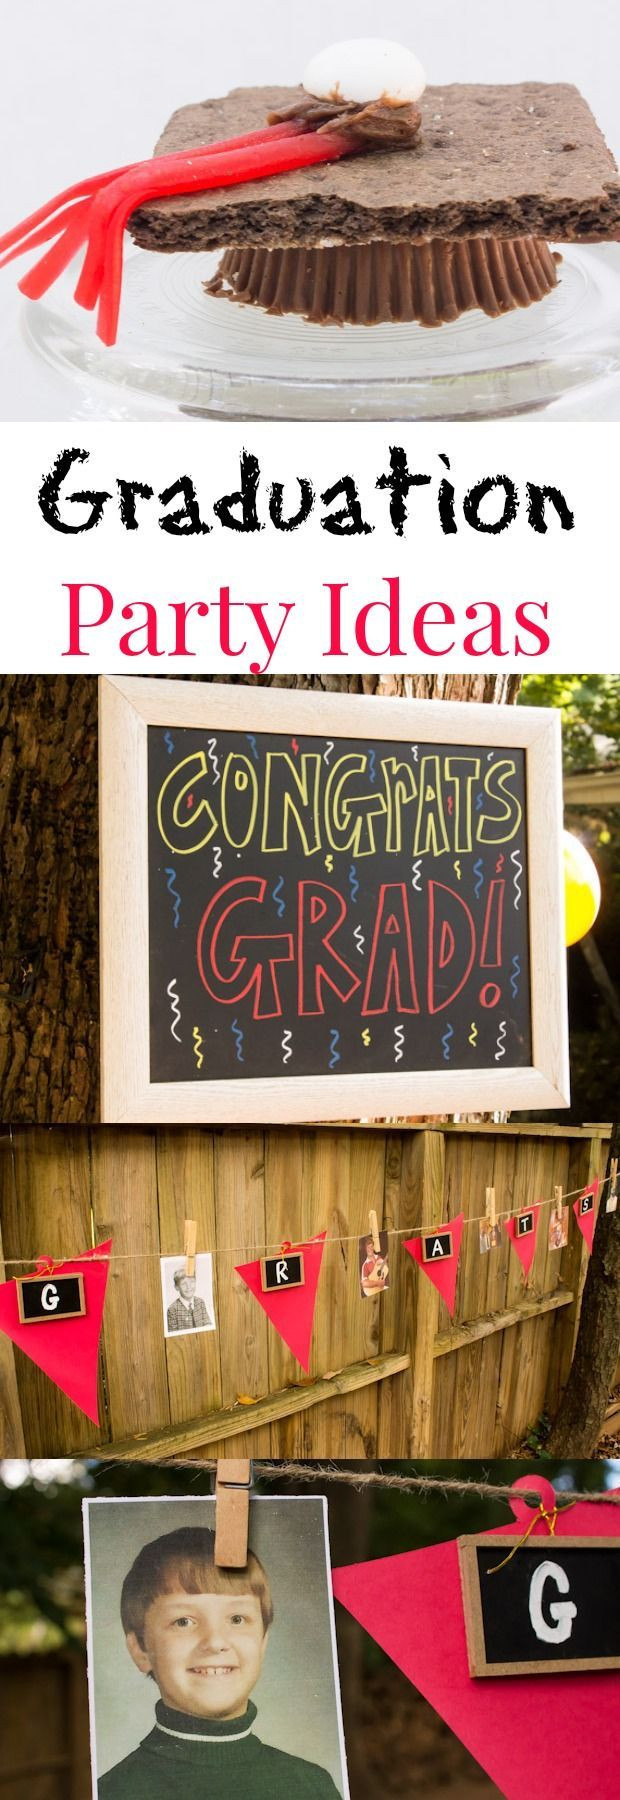 Frugal Graduation Party Ideas
 Graduation Party Ideas for All Ages